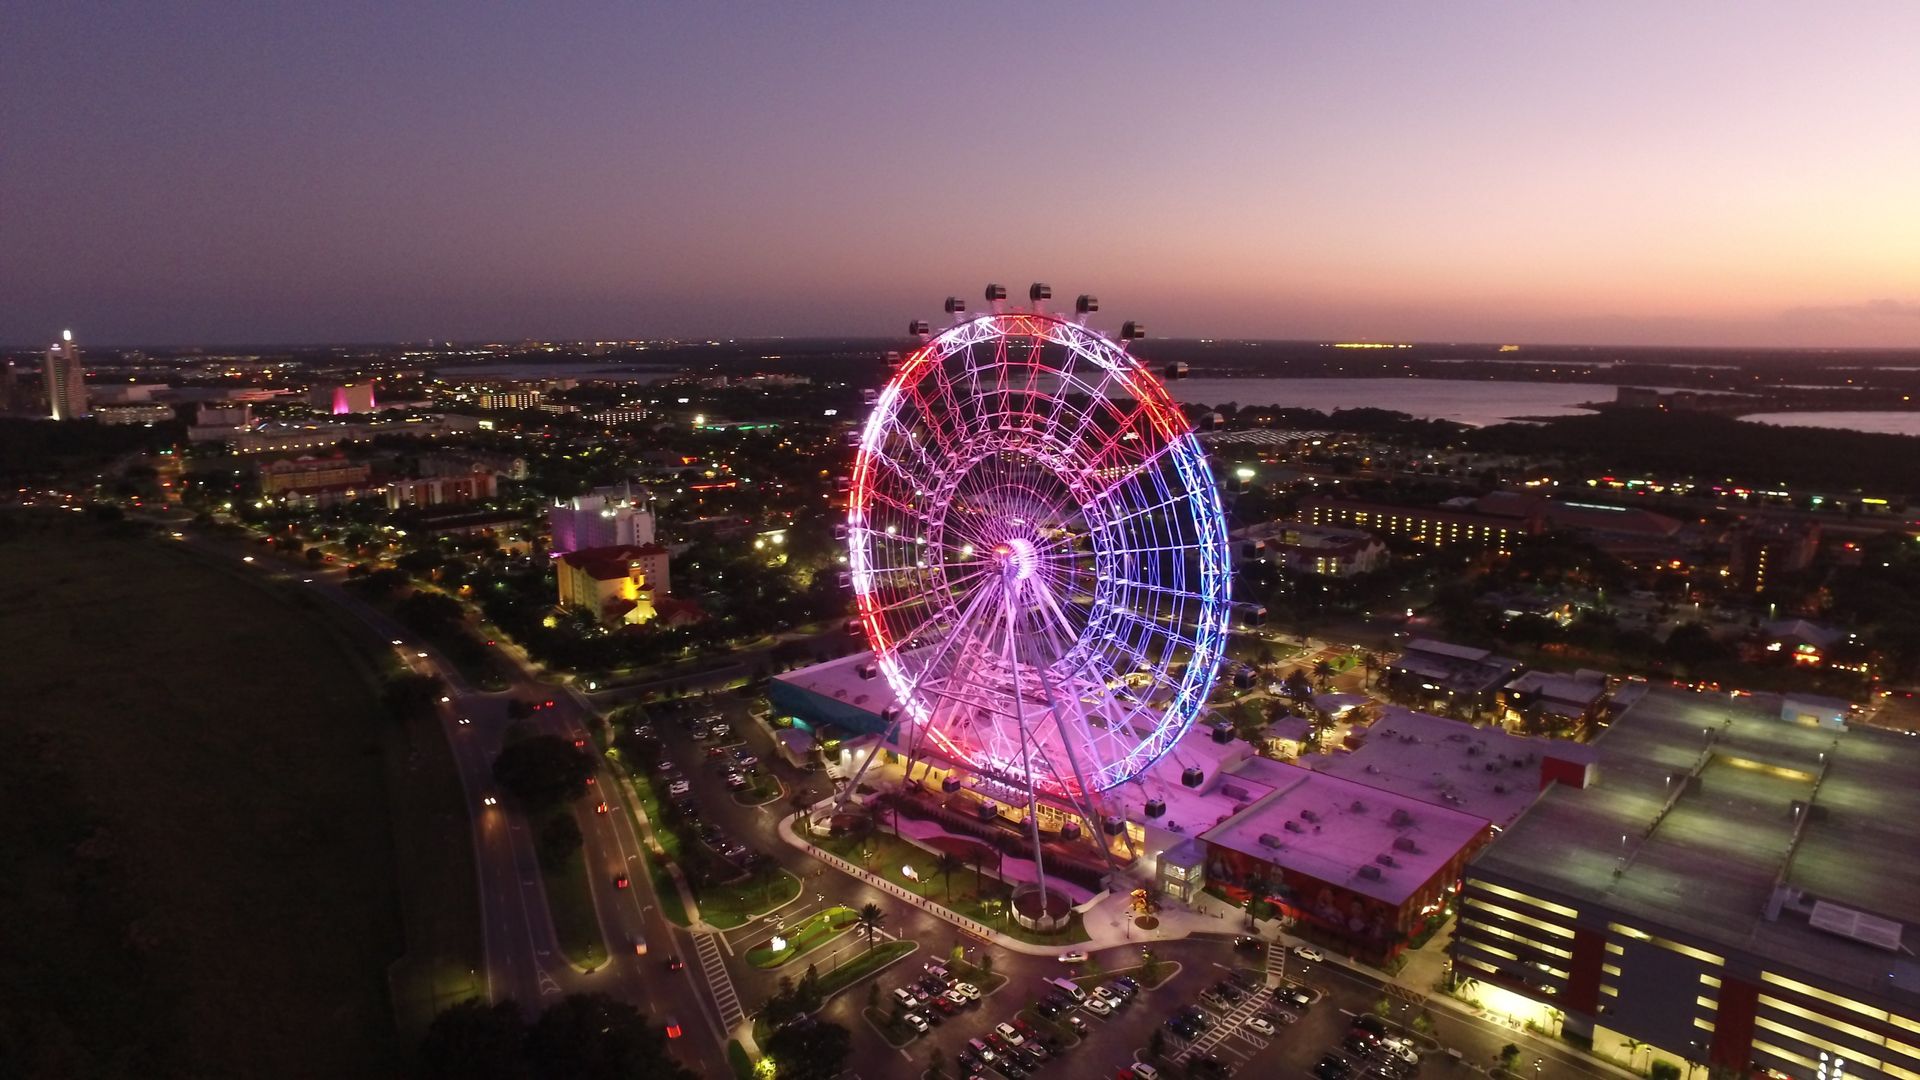 Take a trip up the Orlando Eye and take in panoramic views of the city